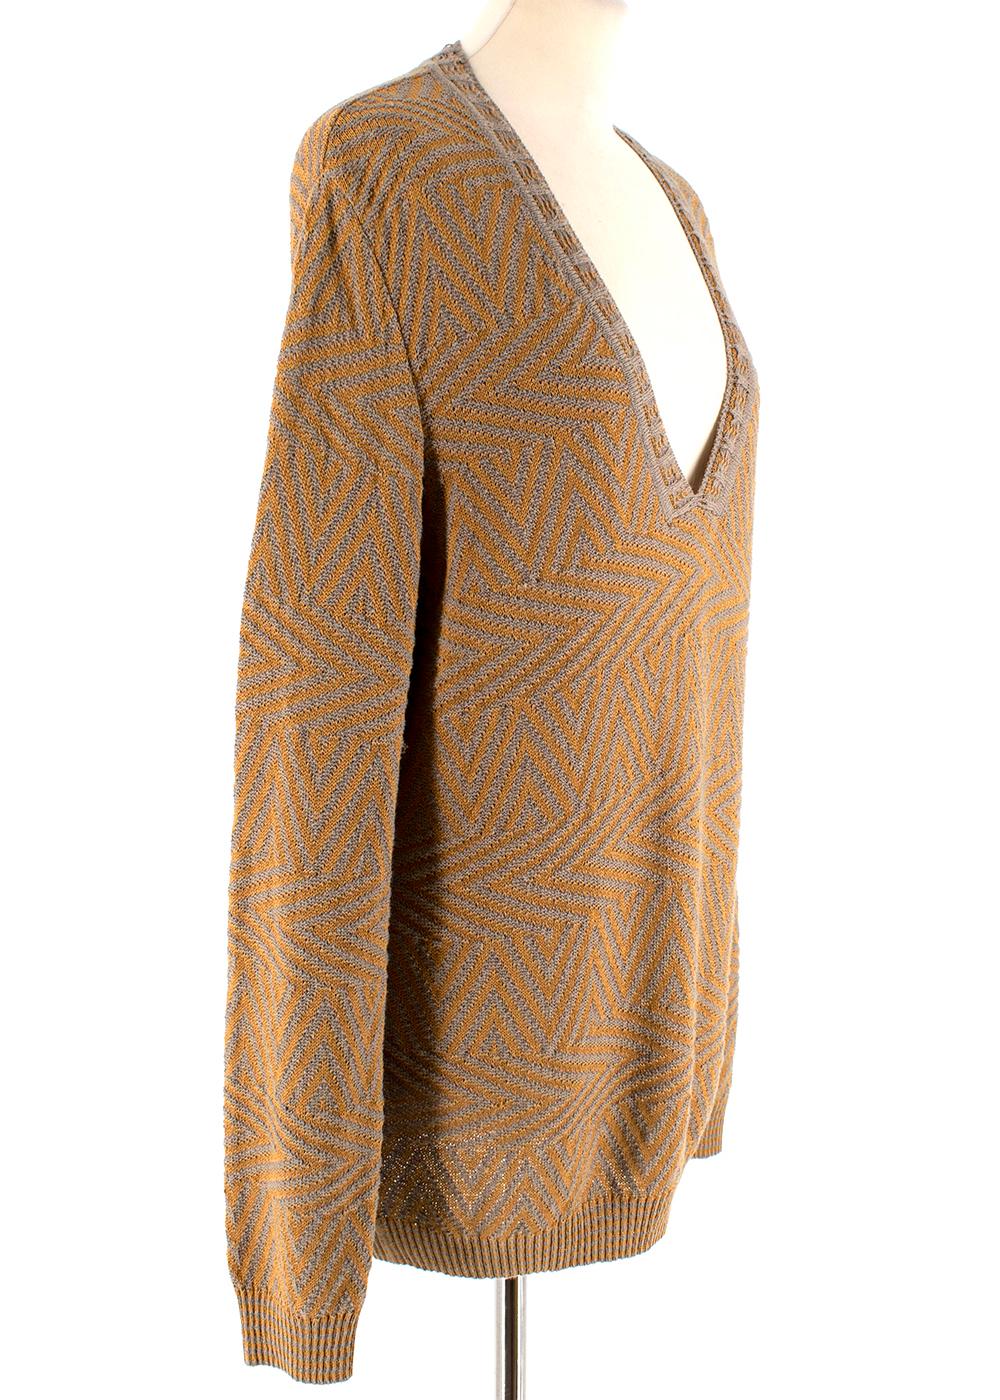 Missoni Orange/Grey Embroidered Knit V-Neck Jumper

-V-Neck
-Elasticated Cuff Ribbing
-Elasticated Bottom Ribbing

Materials:
47% Cotton
21% Rayon
21% Linen
10% Nylon

Made in Italy

Shoulders:50 cm
Sleeve:74 cm
Length: 72 cm